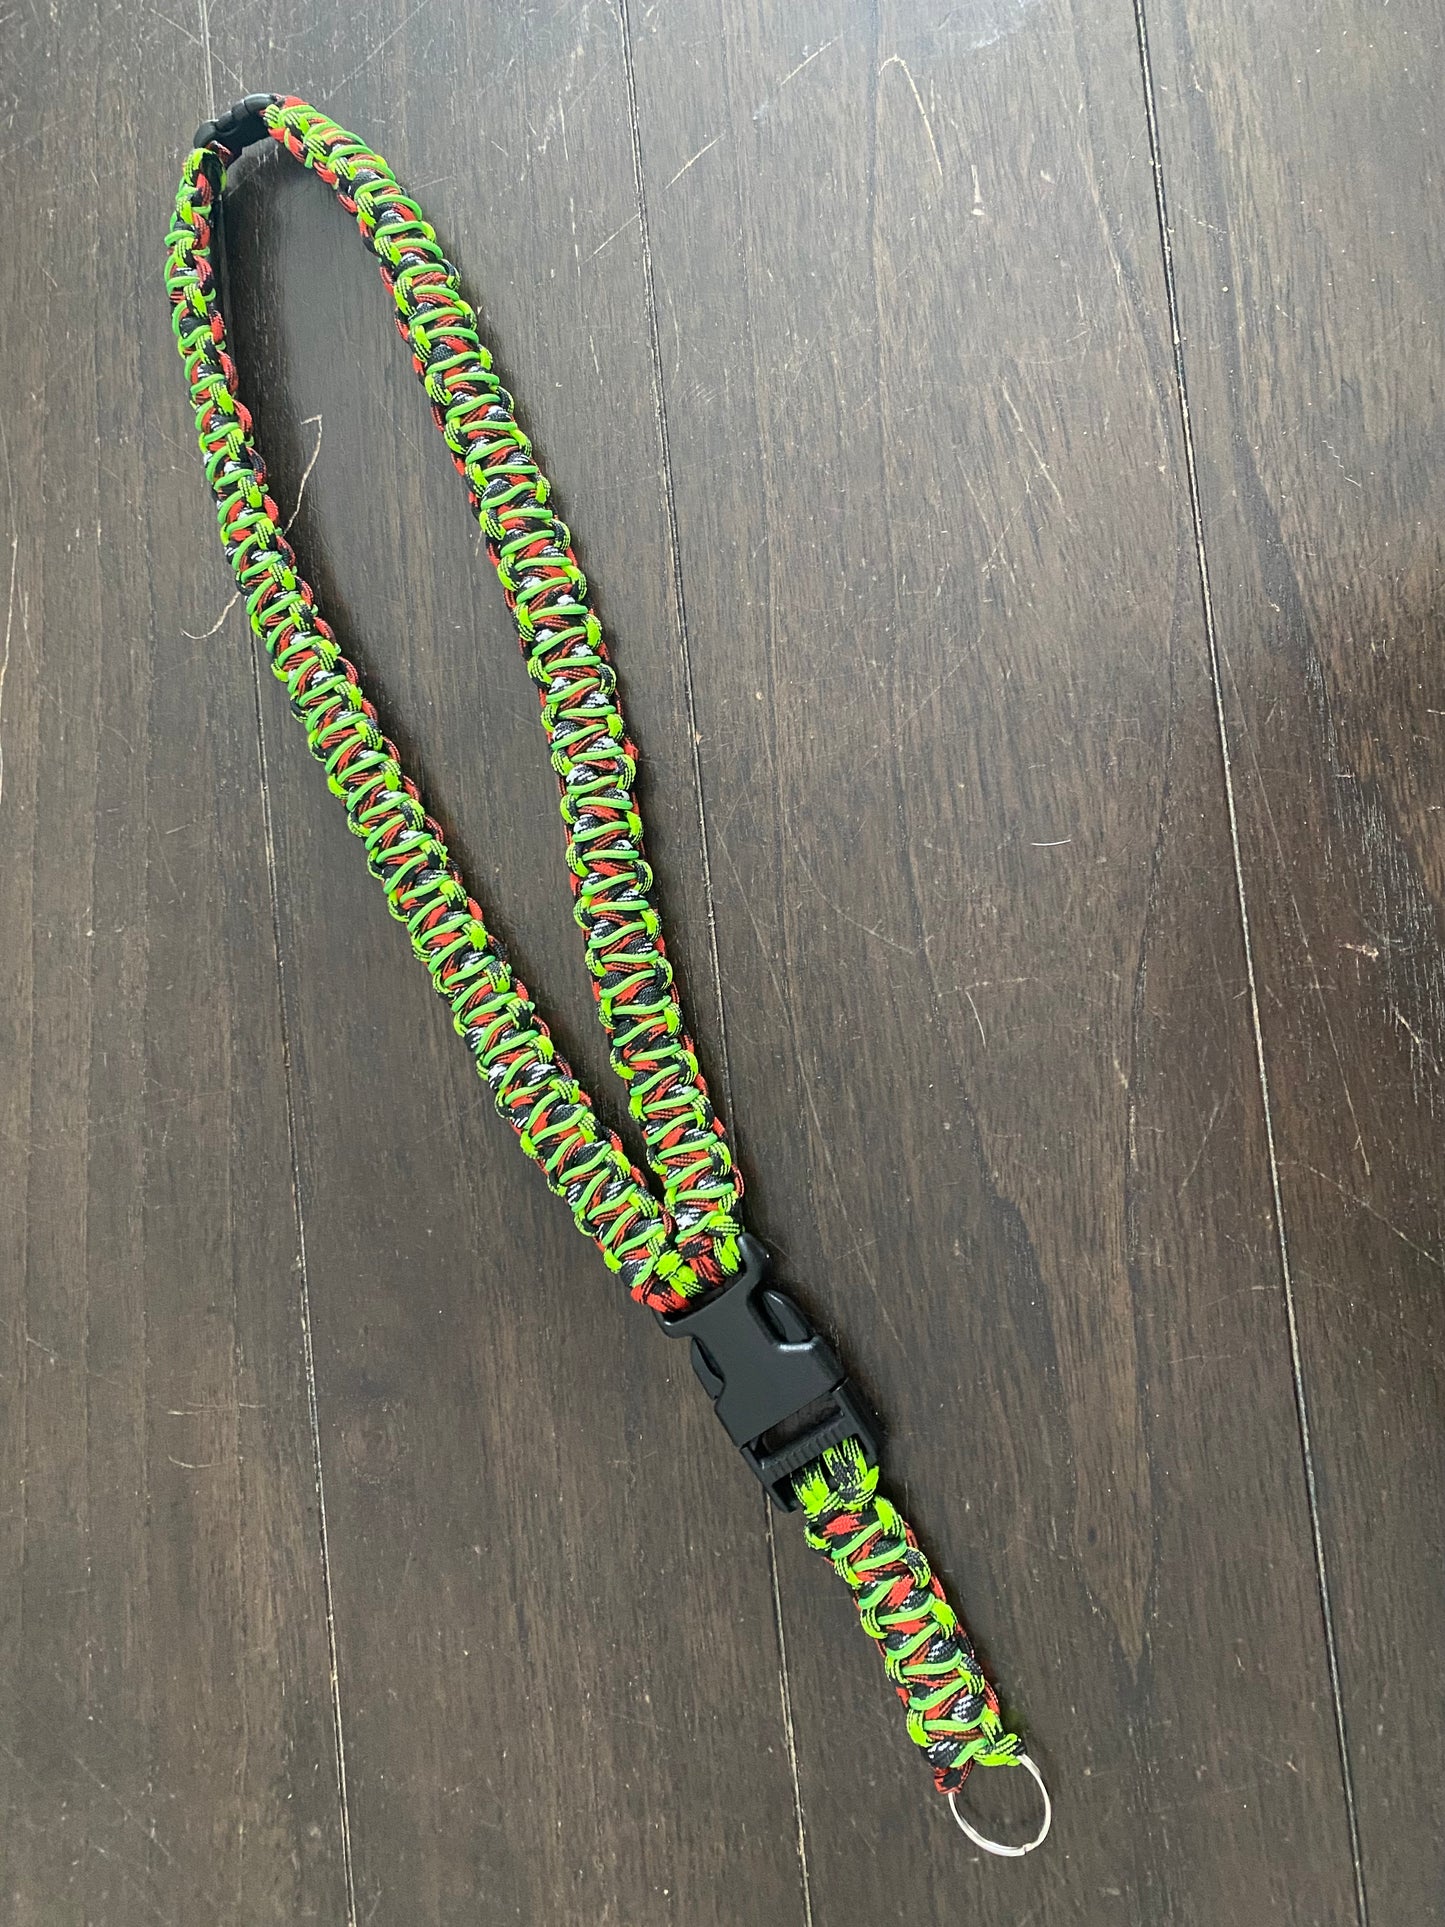 Premade Paracord Soloman's Dragon Lanyard, Red, Neon Green, Black, and White (glow-in-the-dark) Checkering